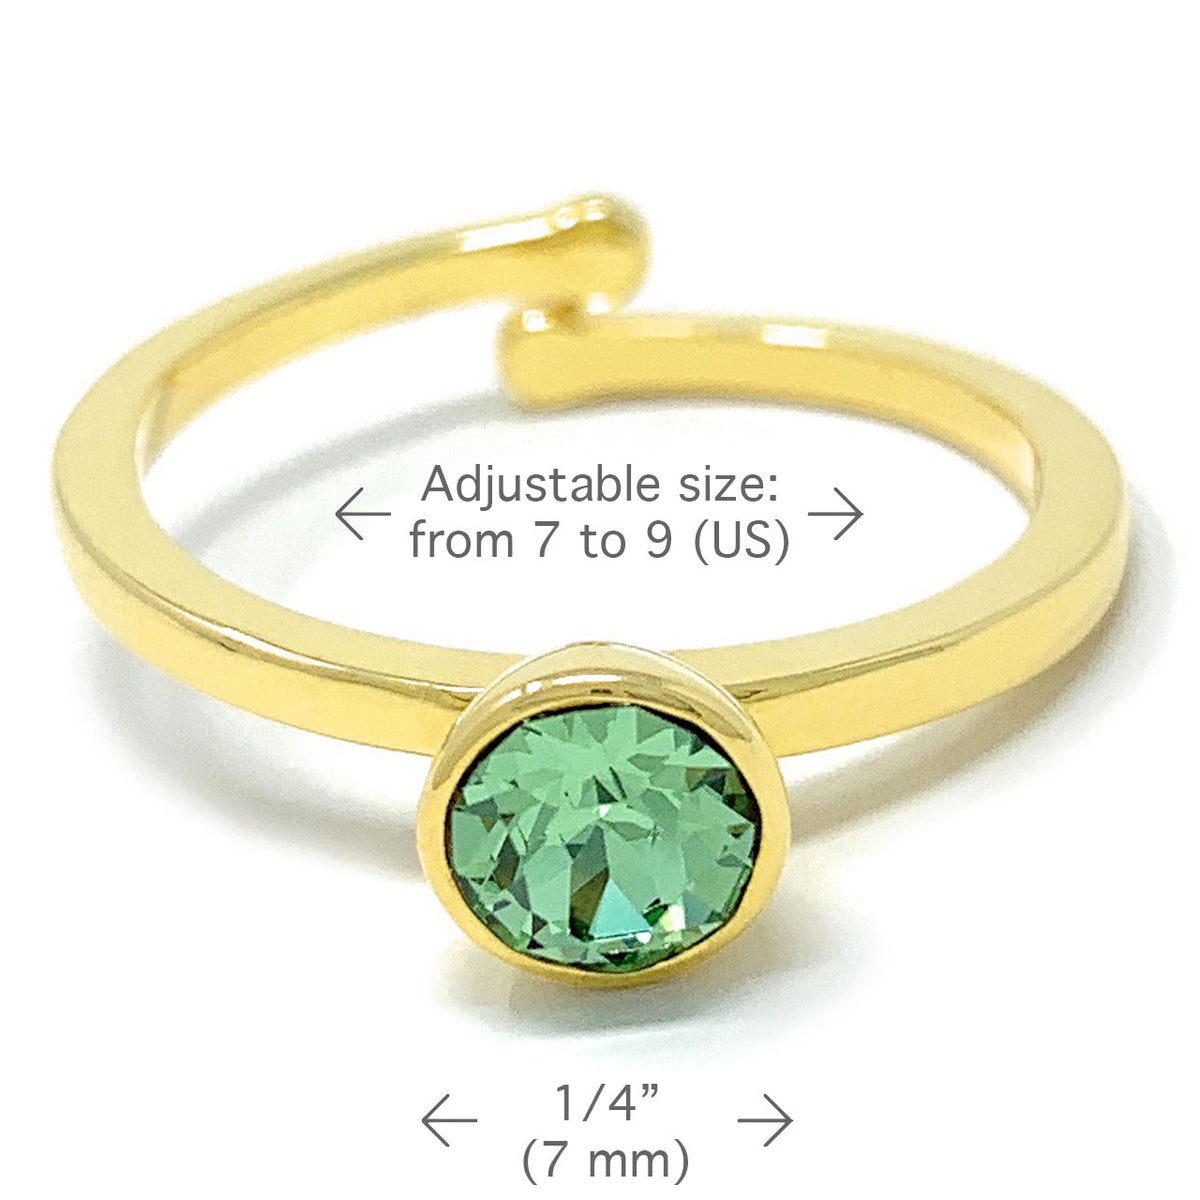 Harley Adjustable Ring with Green Peridot Round Crystals from Swarovski Gold Plated - Ed Heart